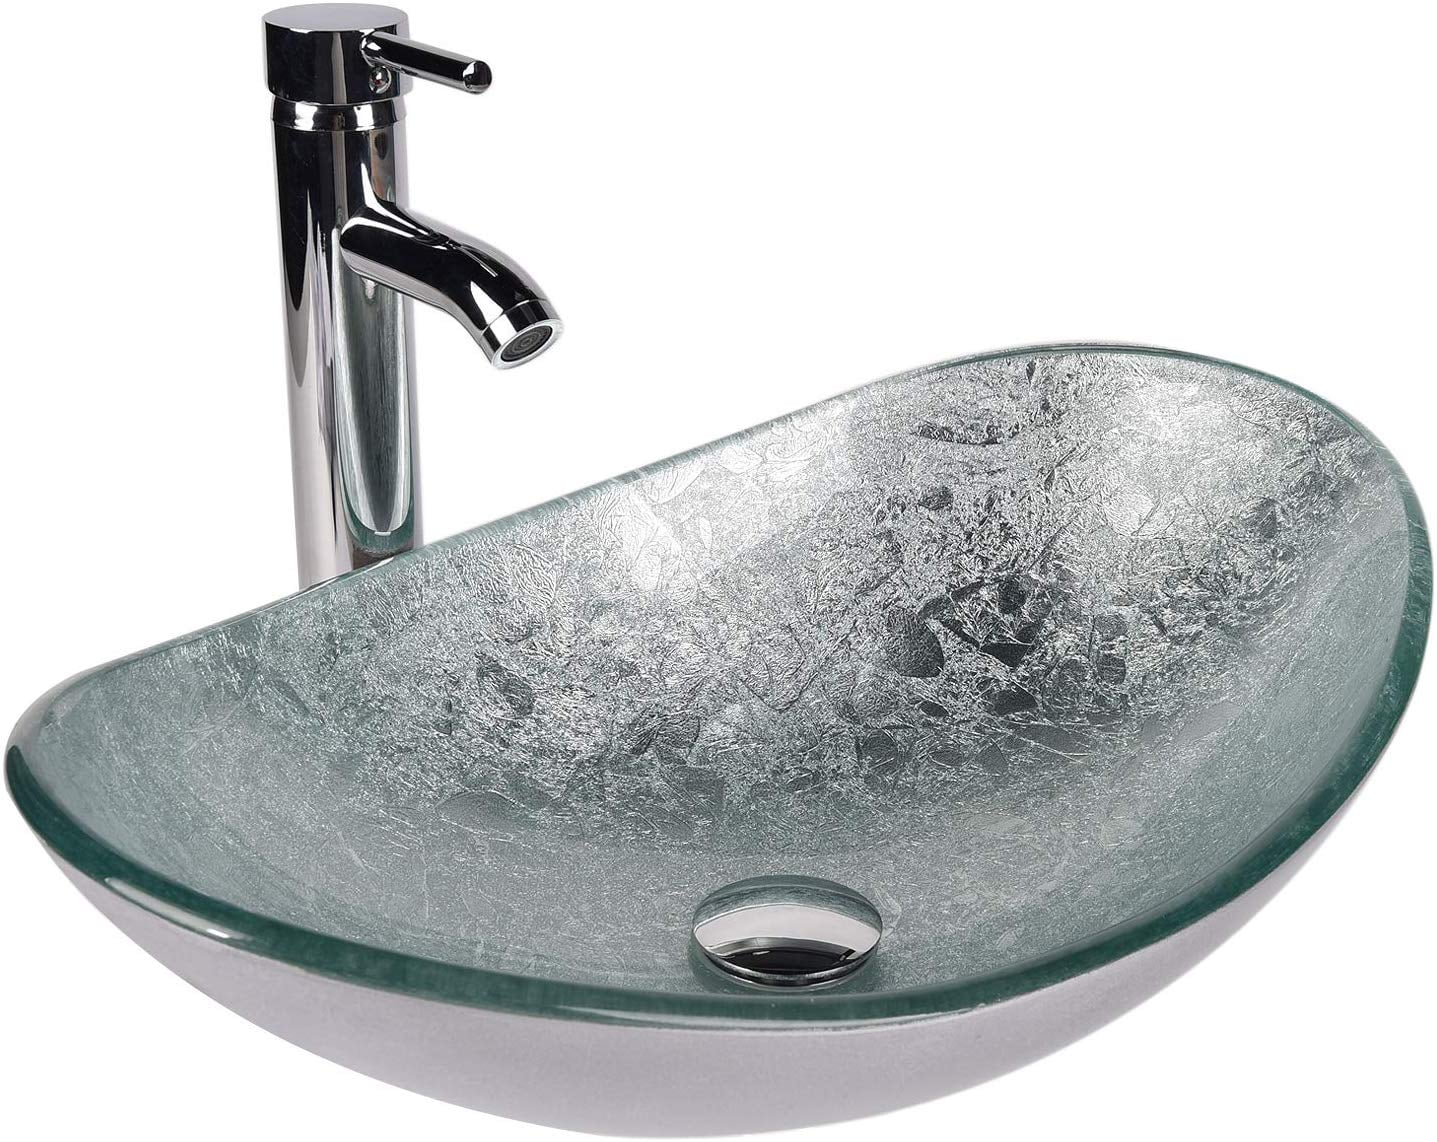 Artistic Tempered Glass Vessel Sink Basin Washing Bowl Set Bathroom Sink and Faucet Combo Cabinet Countertop Sink with Chorme Faucet Pop-up Drain and Water Pipe Lavatory Washroom Oval Silver 